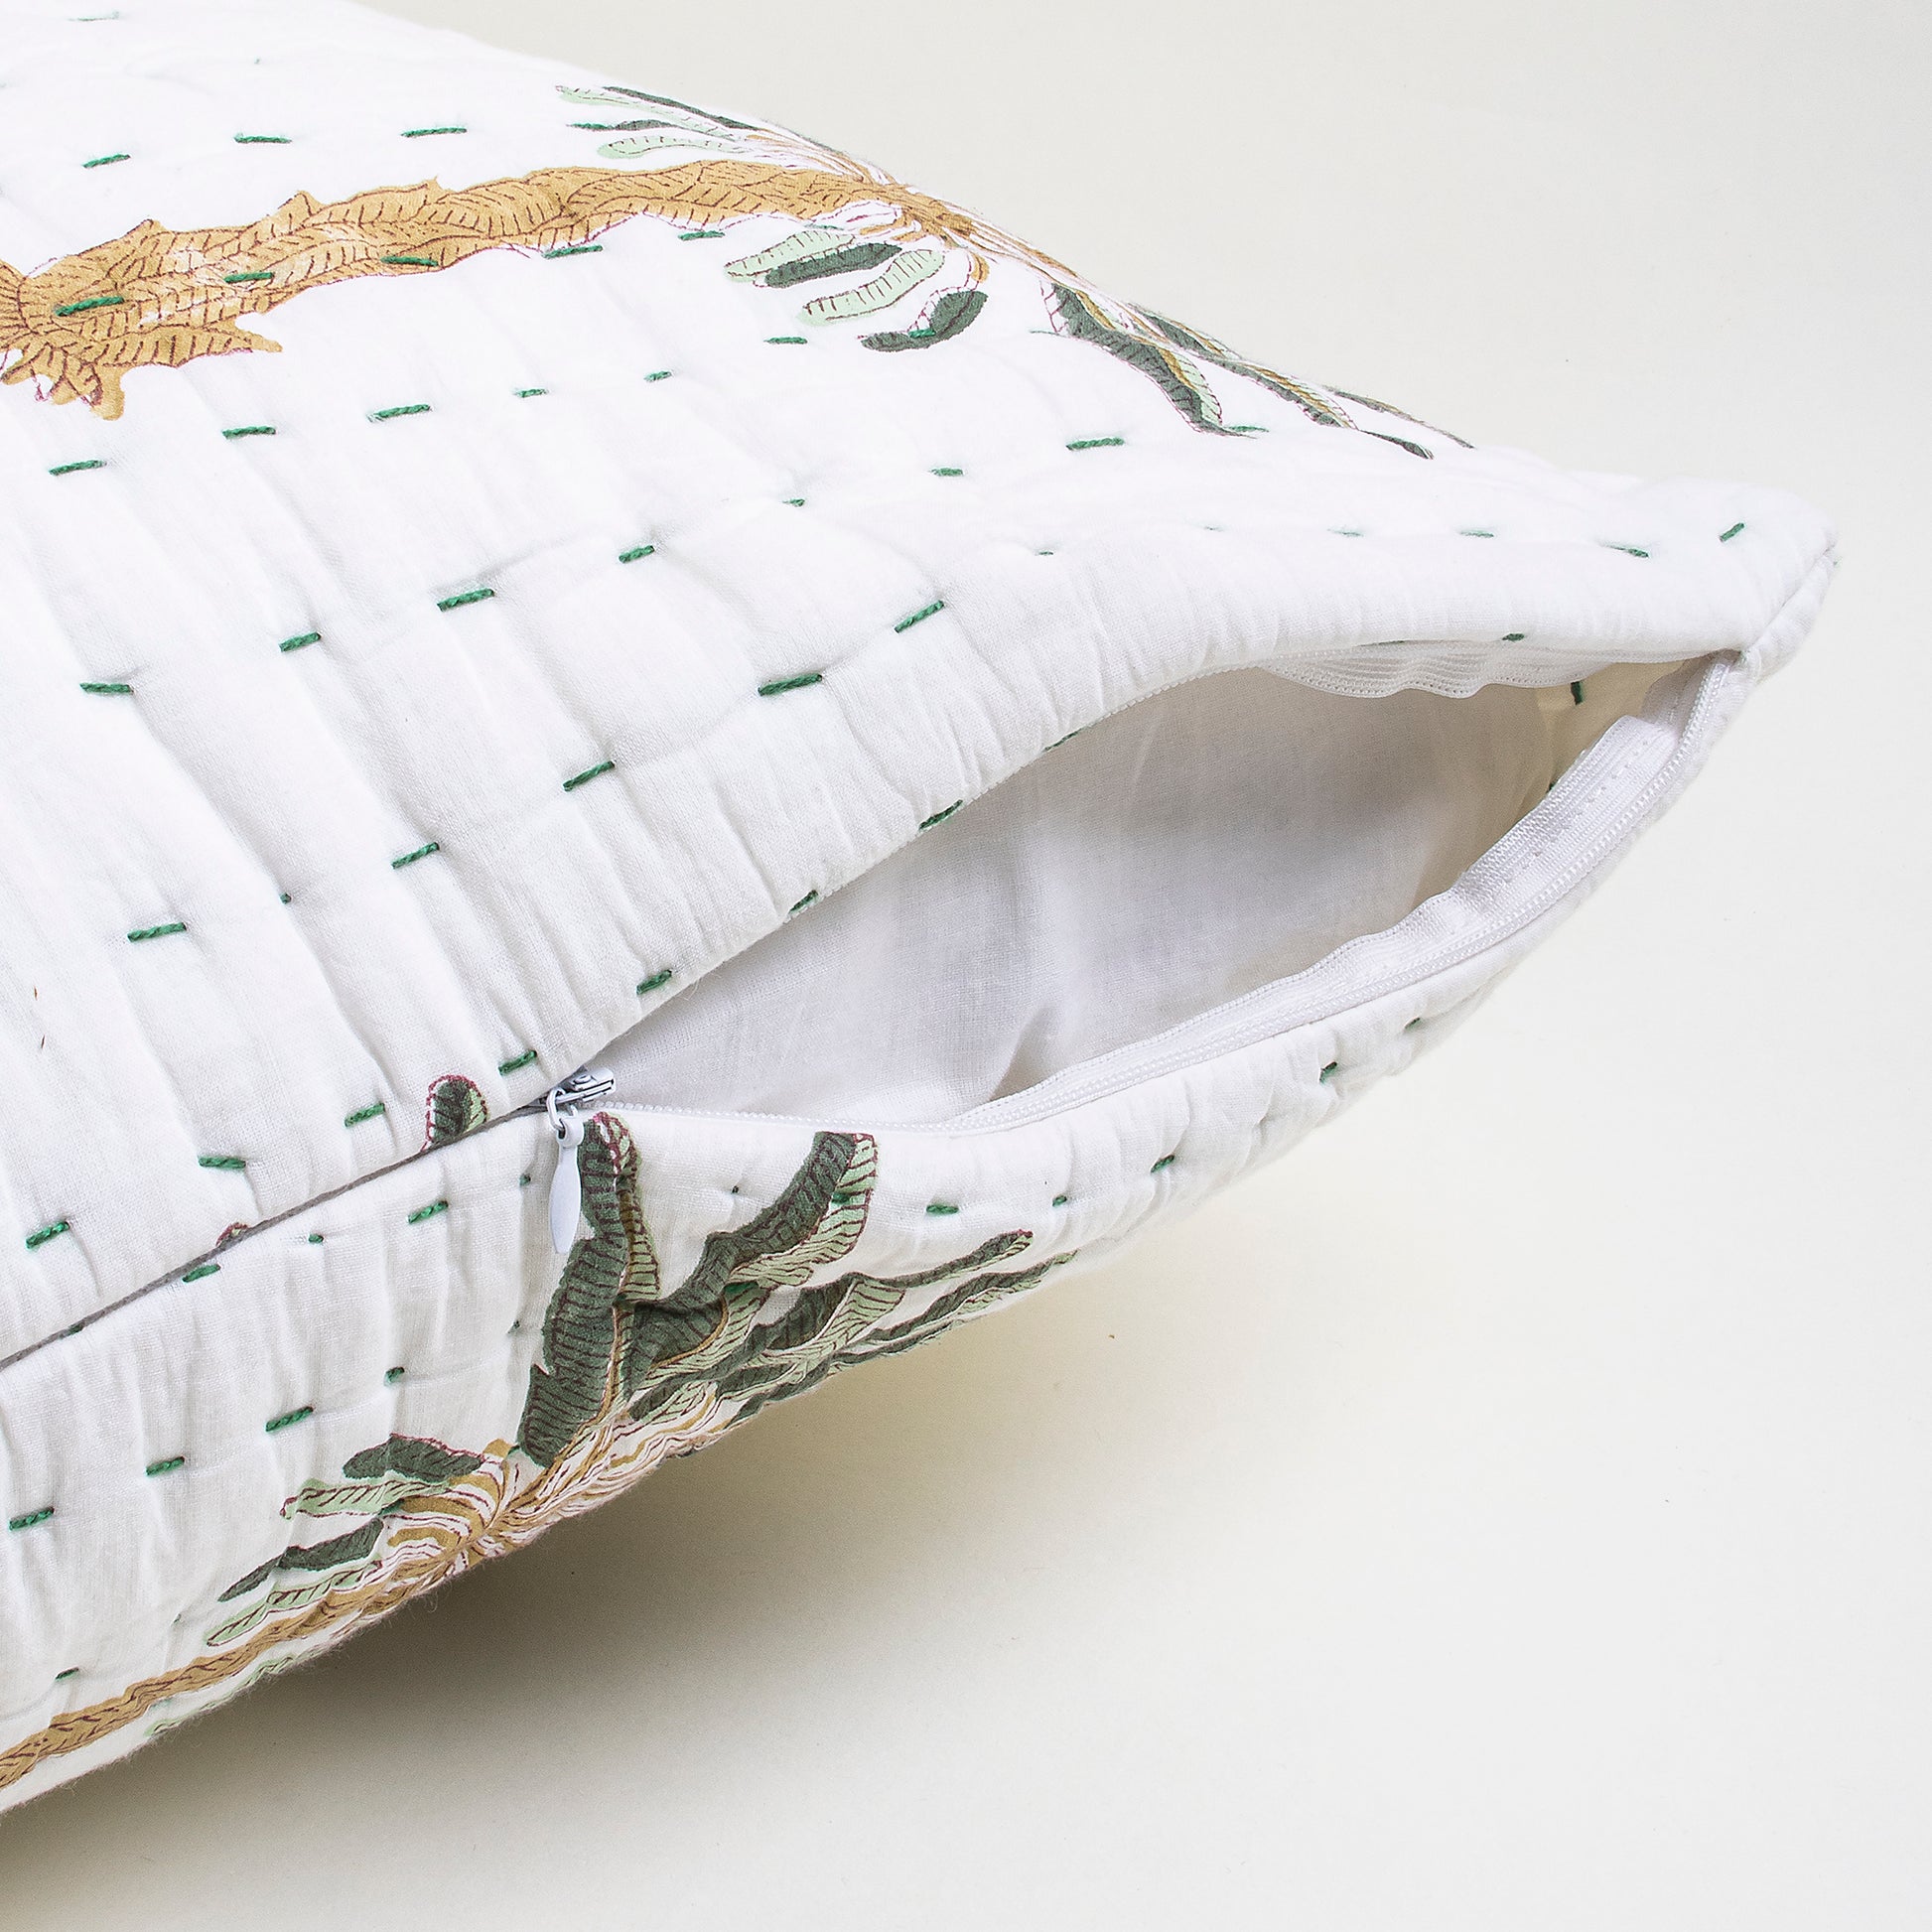 Kantha Cotton Handmade Pam Print Quilted Pillow Covers